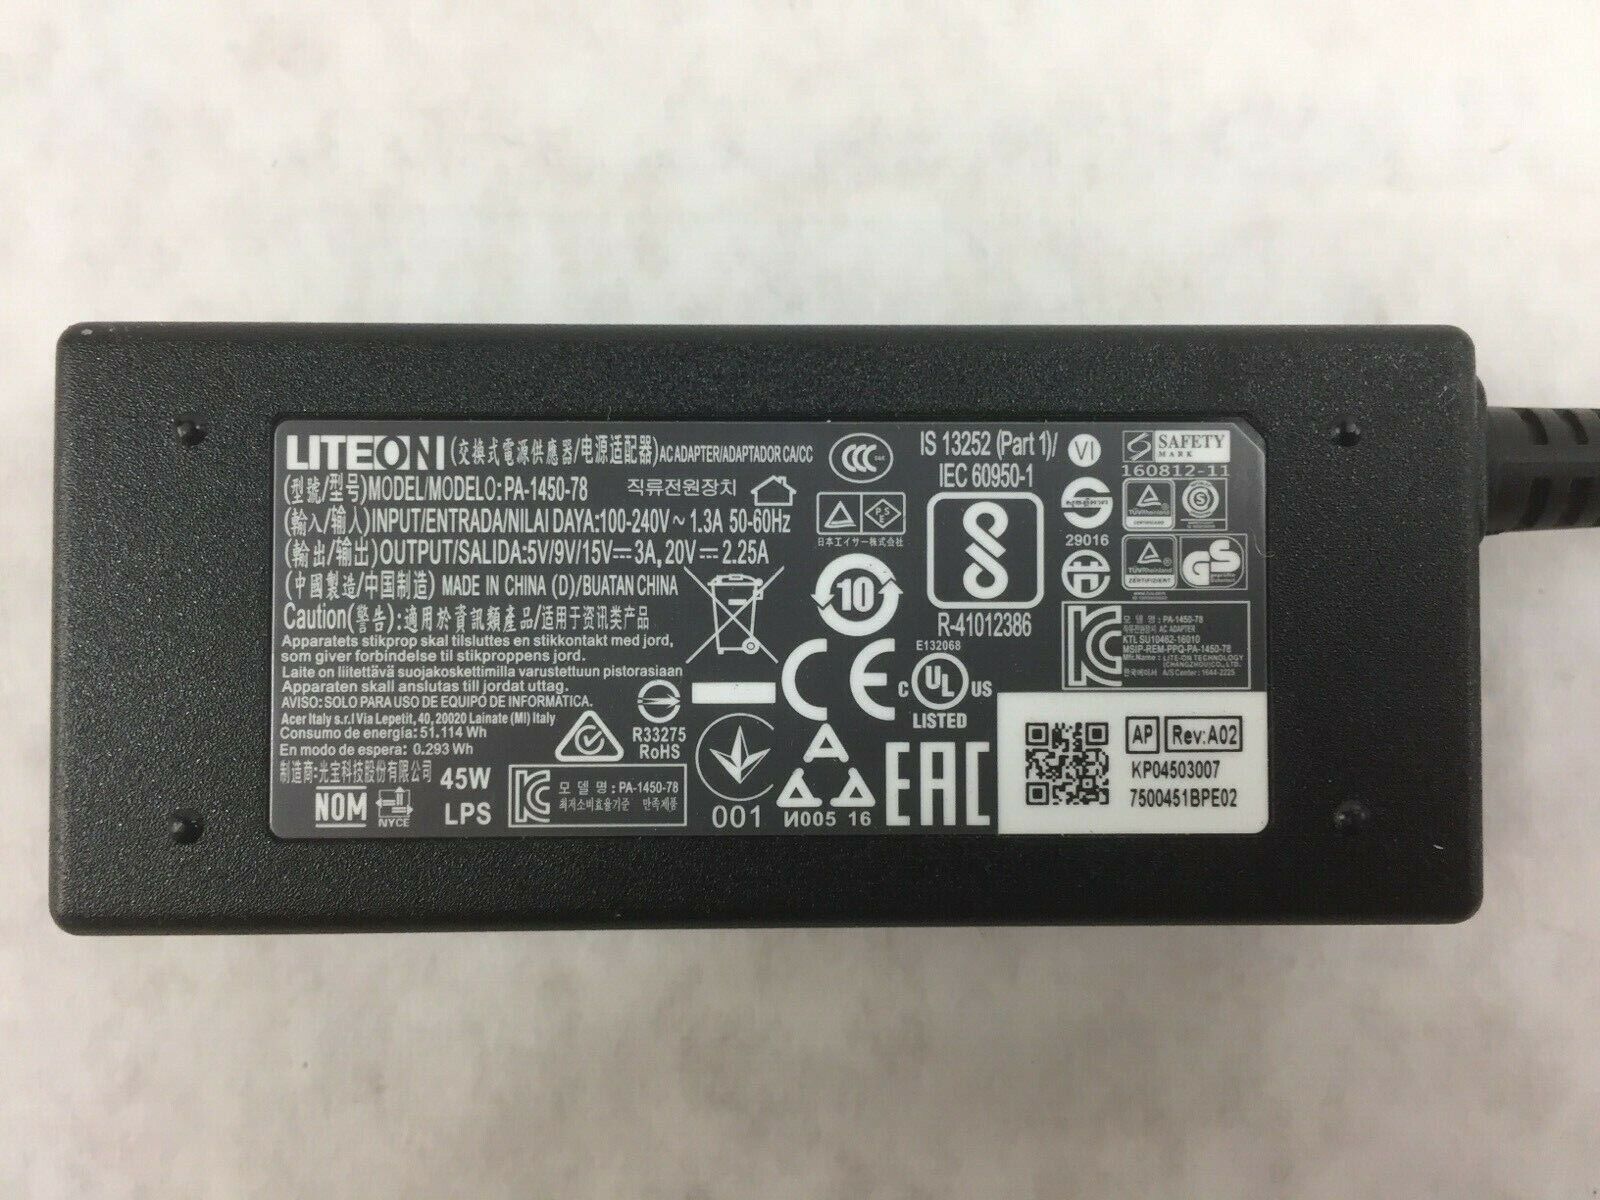 Liteon Laptop Charger AC Adapter Power Supply PA-1450-78 USB-C Tip 45W